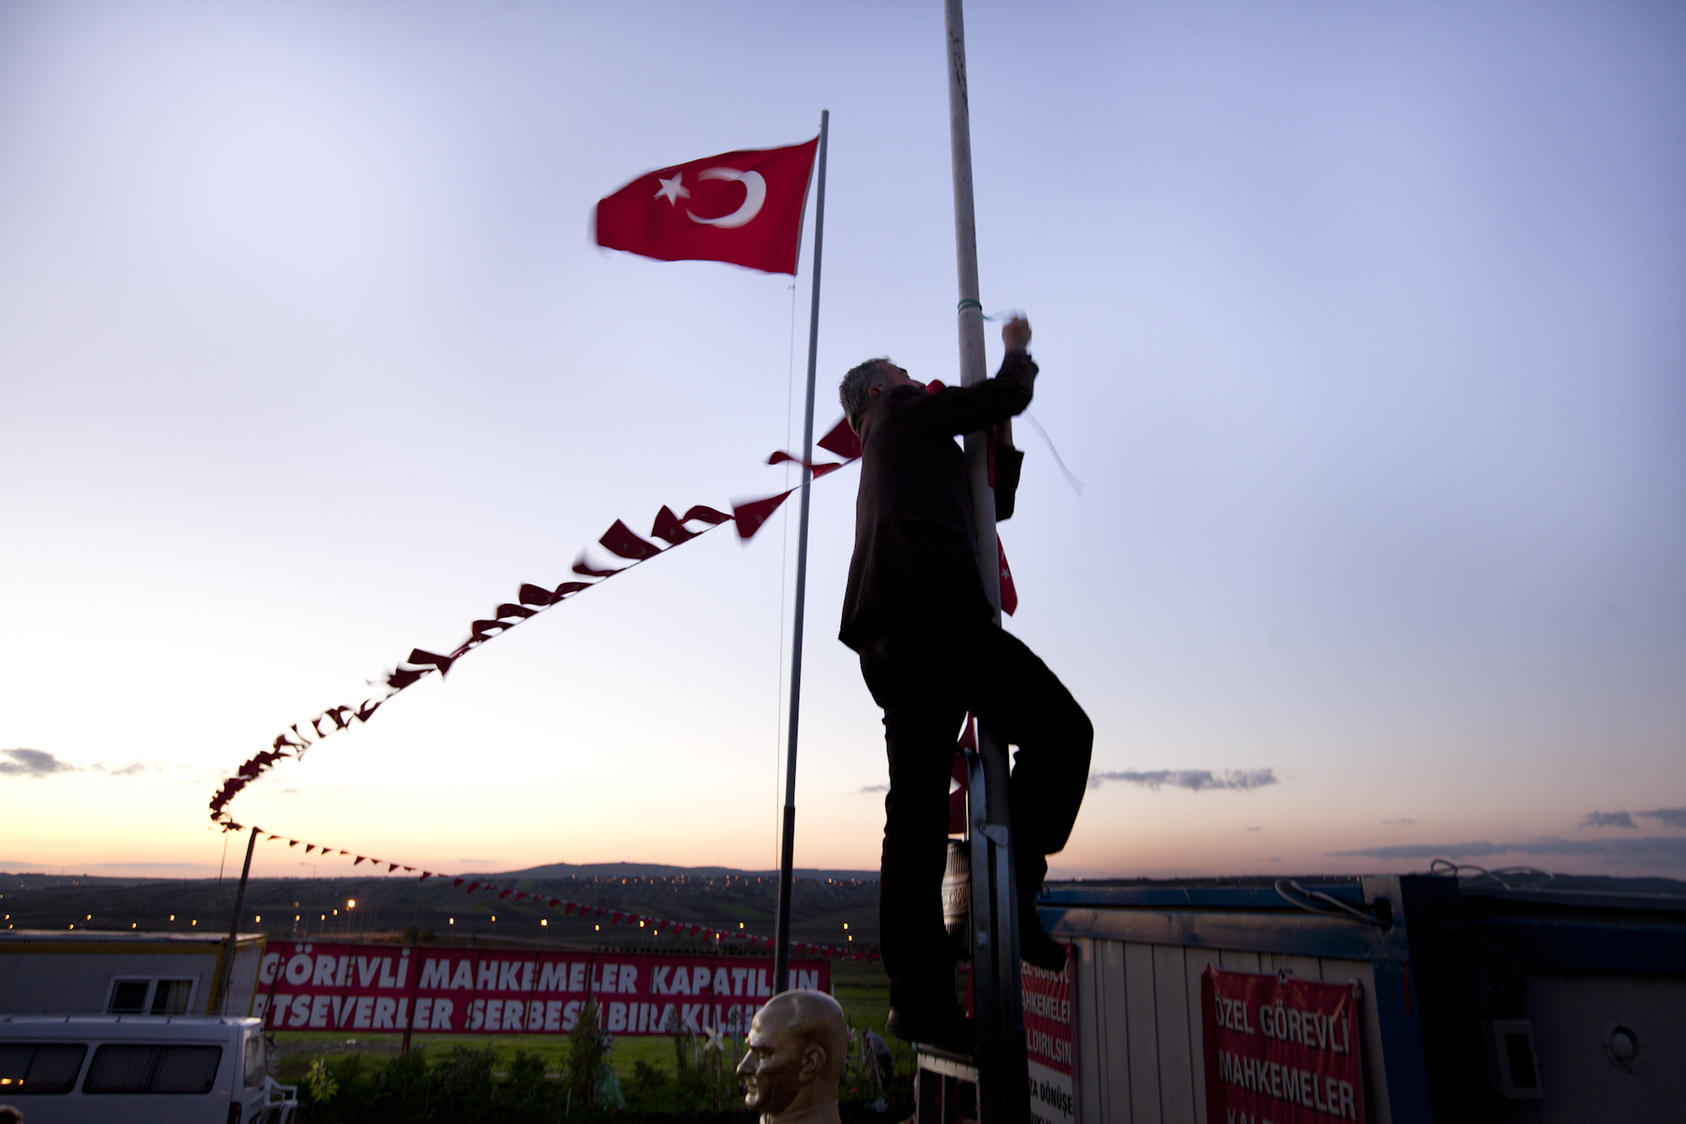 A man ties flags around a pole at a protest camp outside a prison and courthouse in Silivri, Turkey, Nov. 8, 2012. Secular protesters have set up a camp to protest the trial of hundreds of military officers charged with plotting to overthrow the Islamic-rooted government.